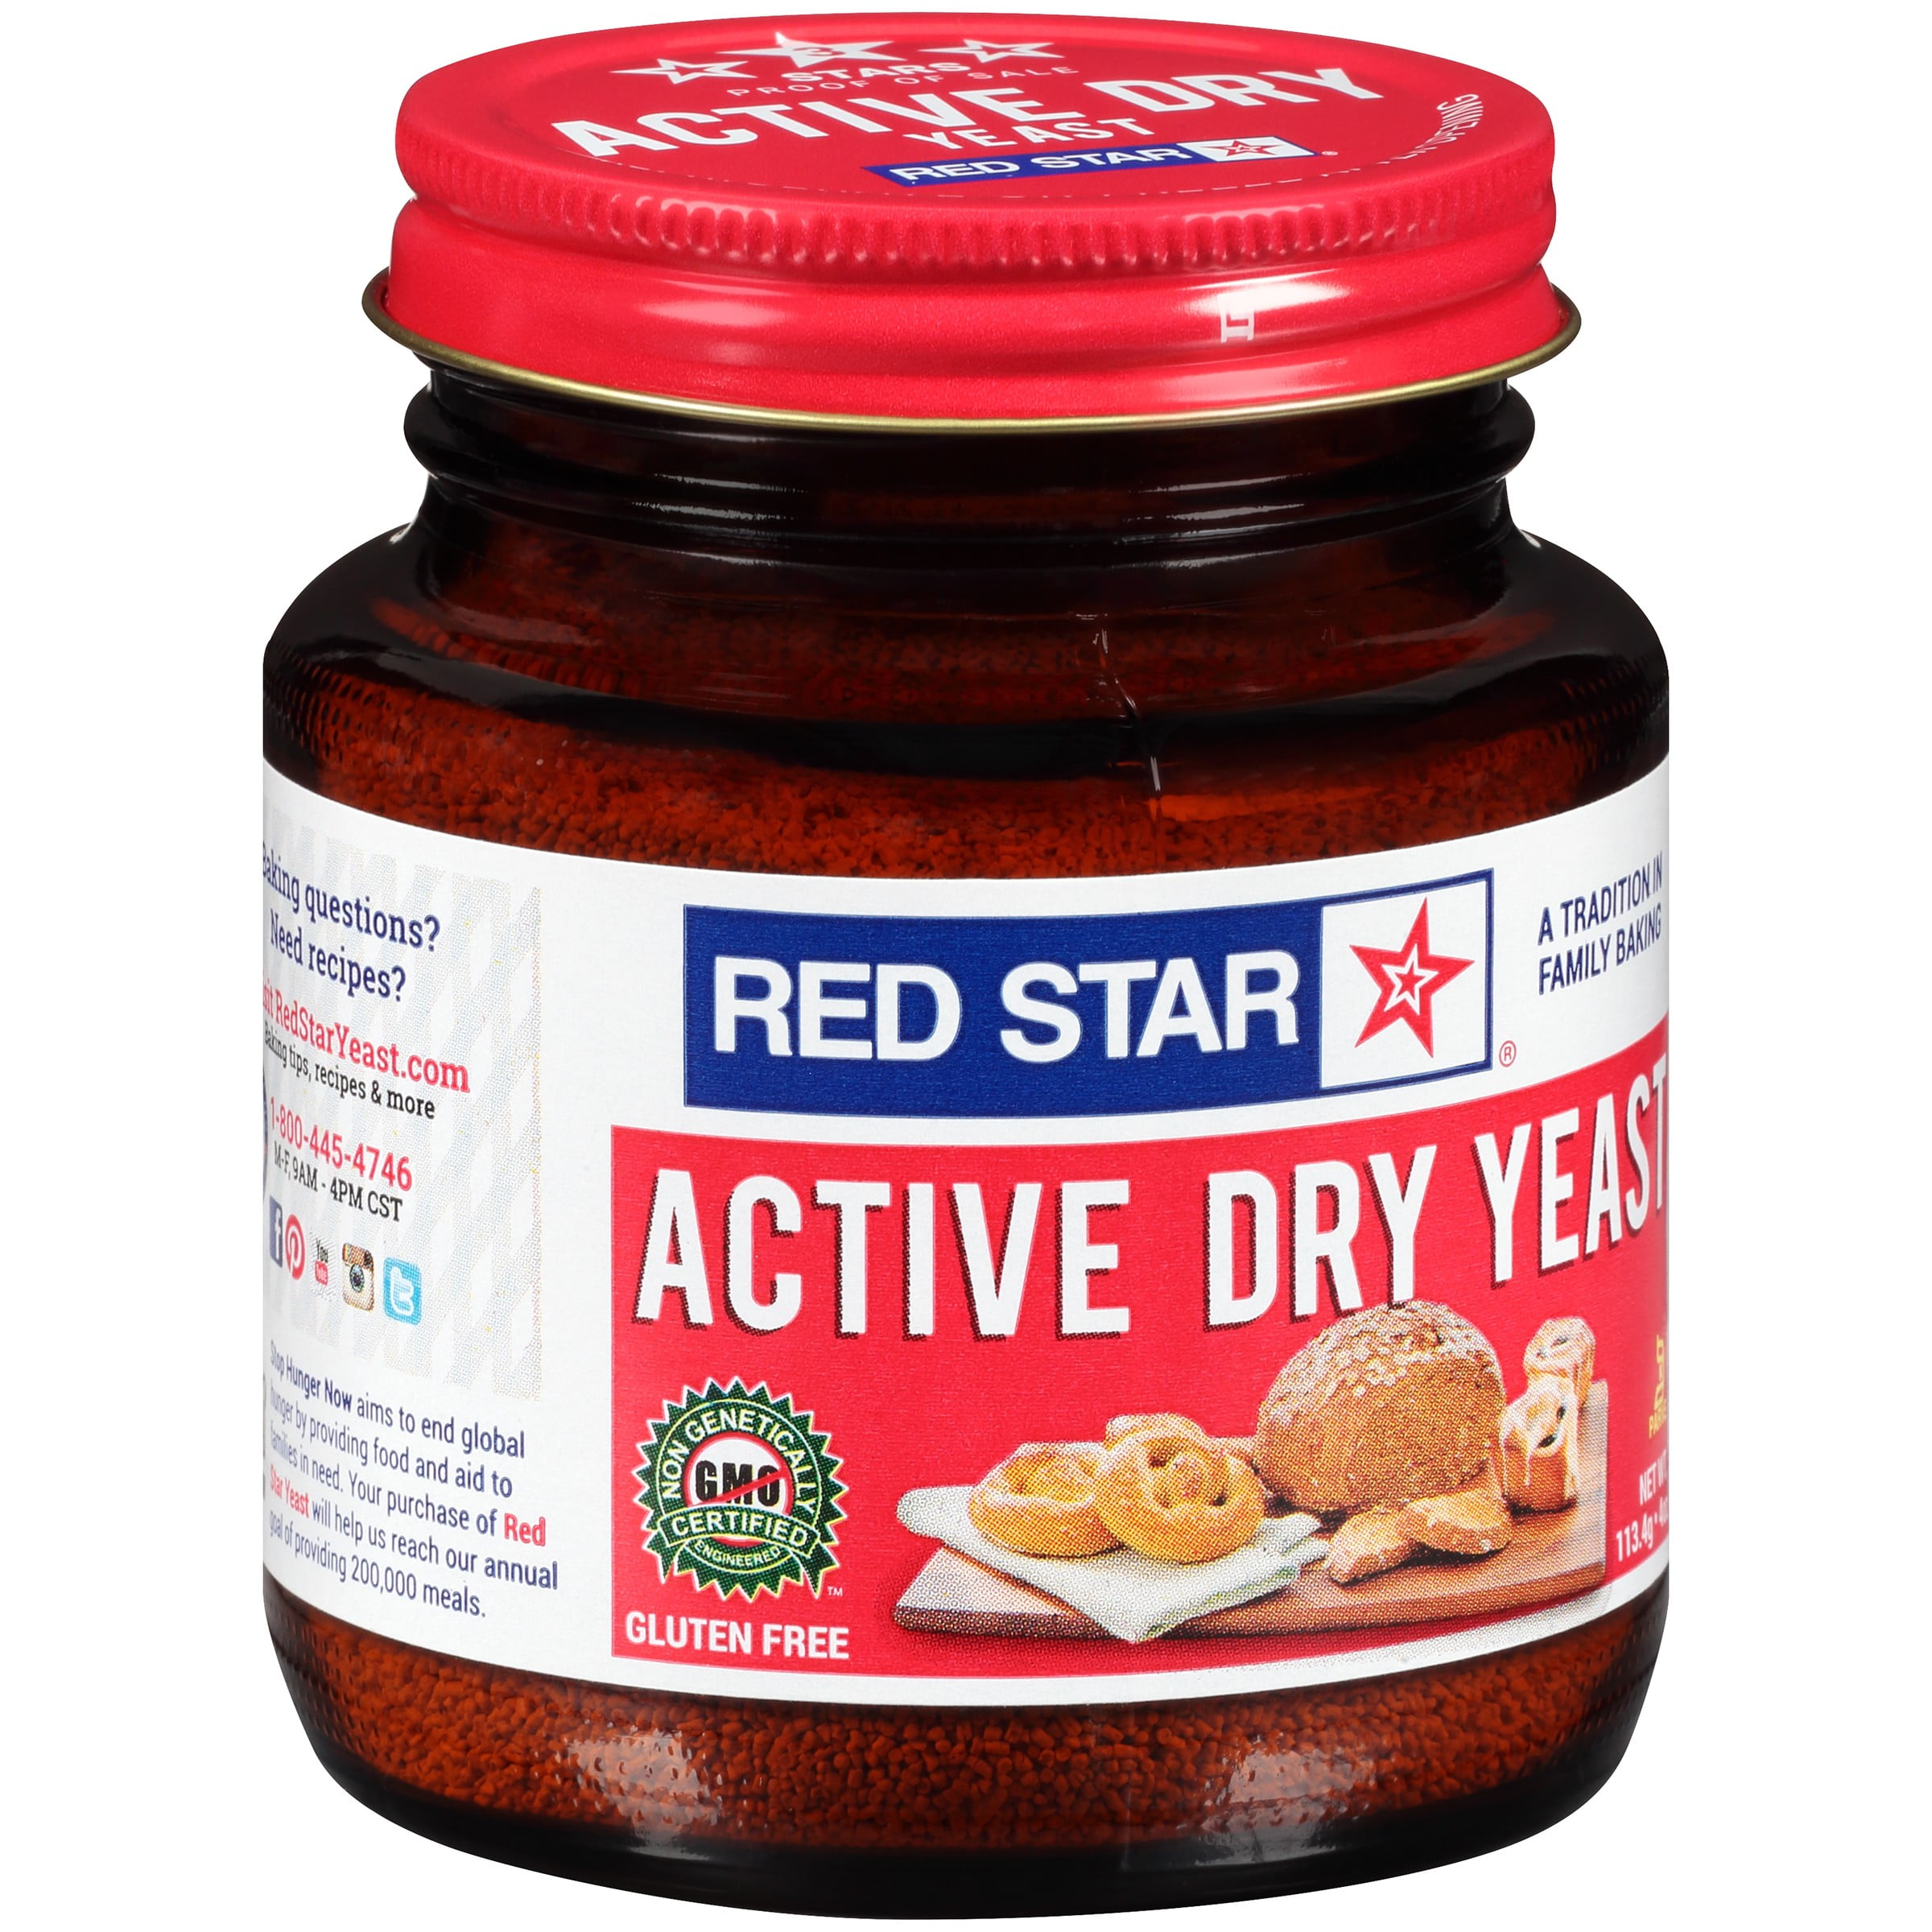 Active dried yeast. Star activity